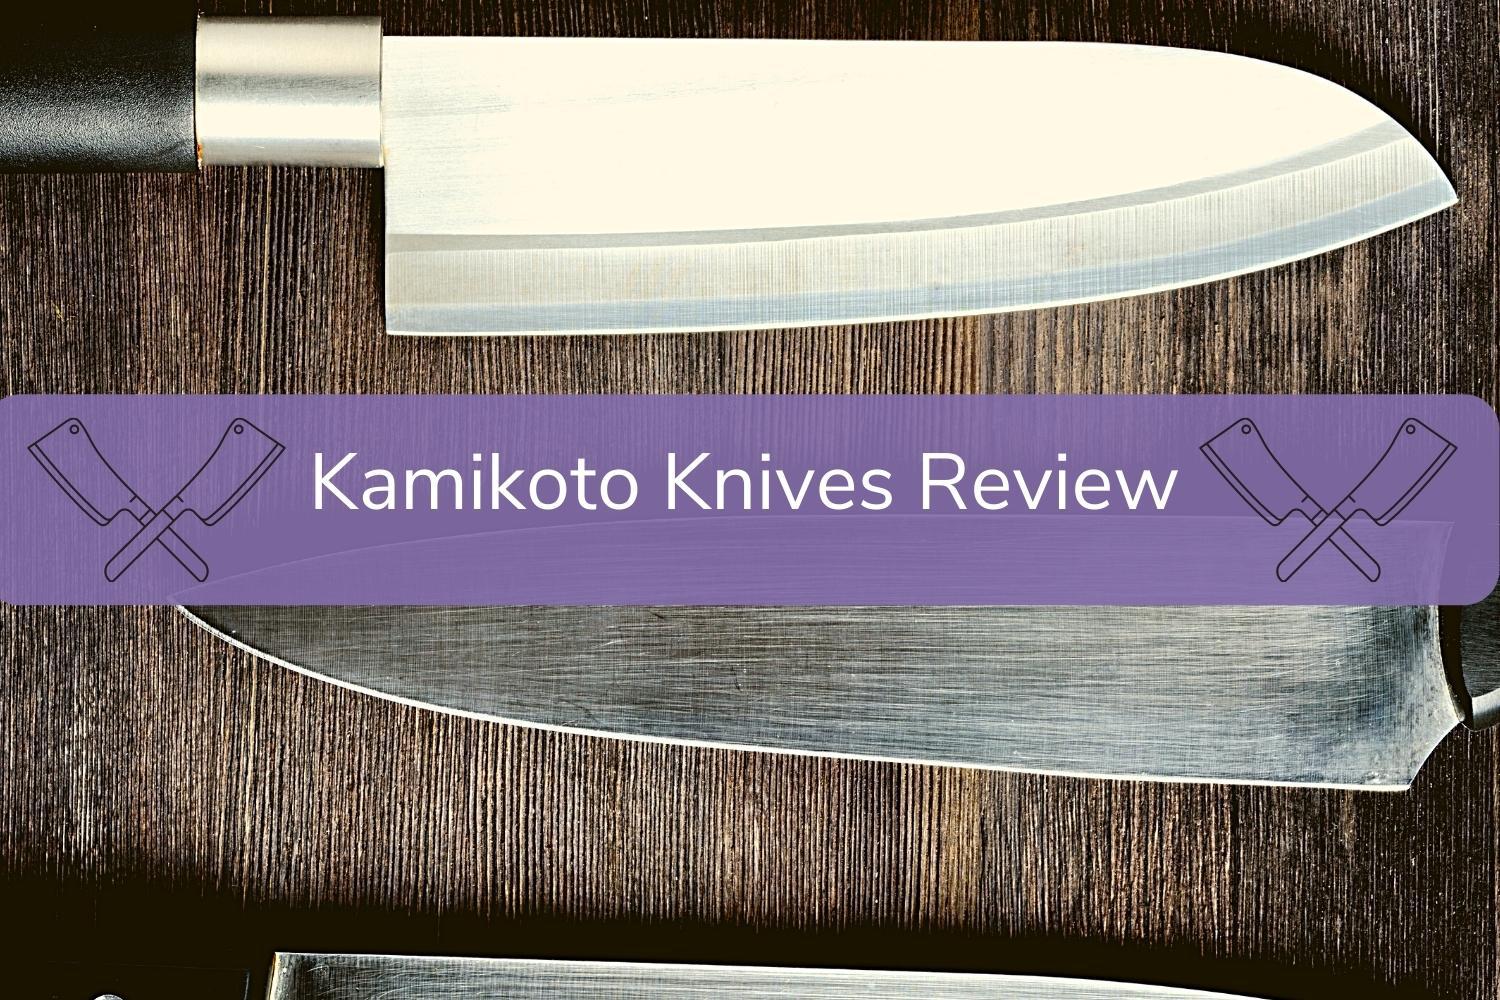 https://clankitchen.com/wp-content/uploads/2022/03/Kamimoto-knives-Review.jpg